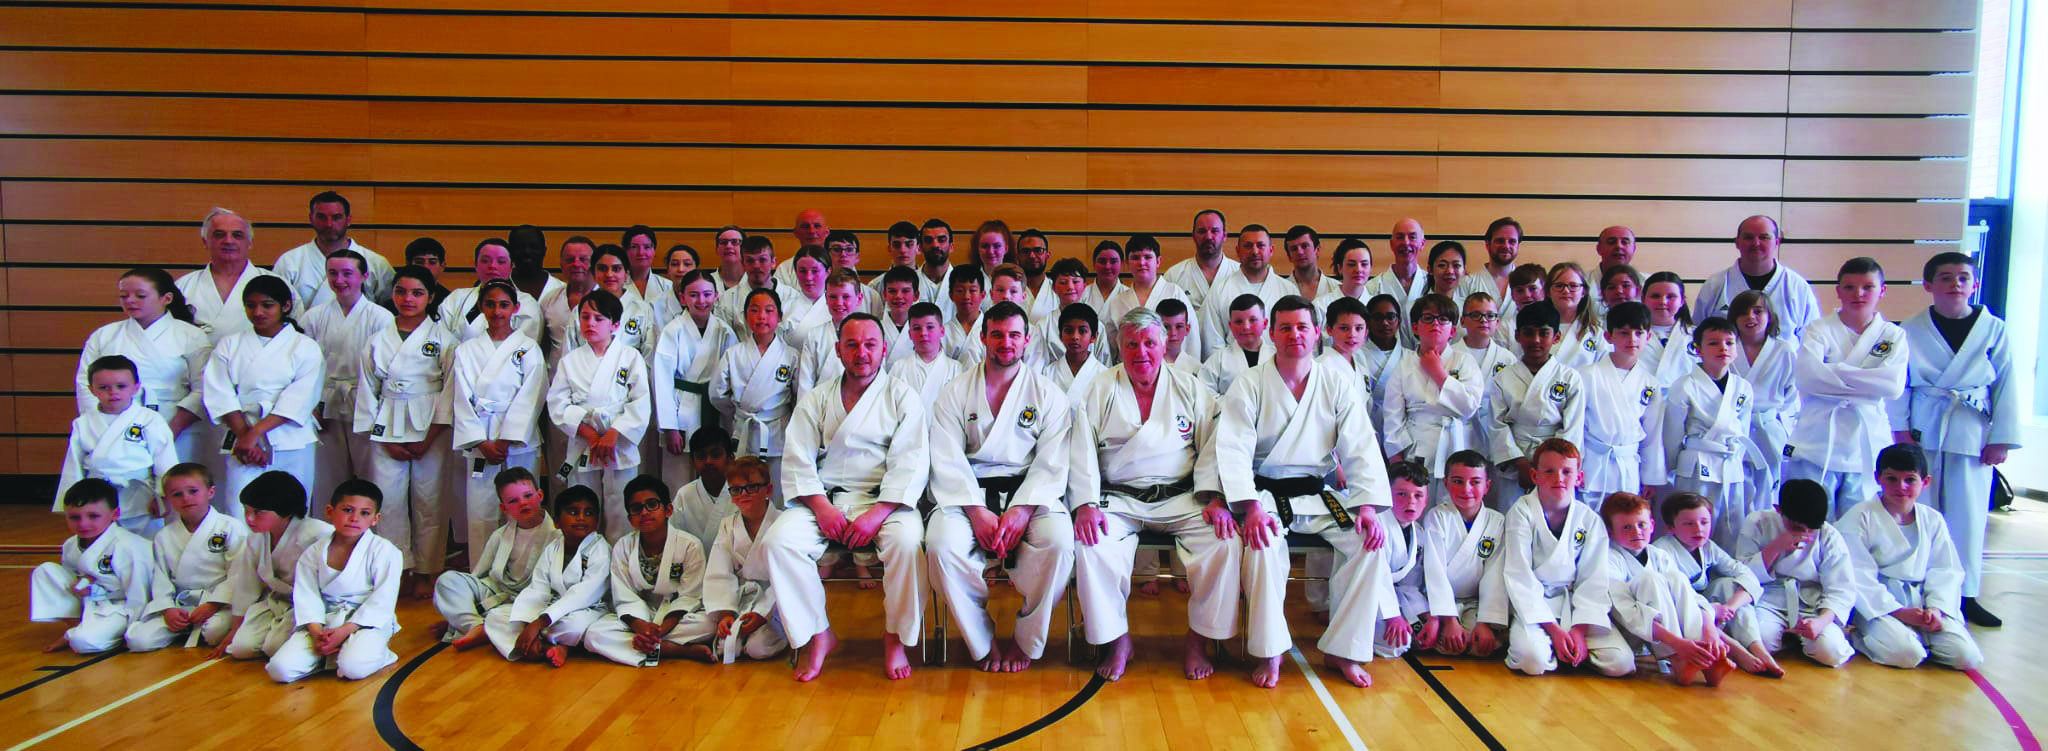 The karate course conducted by Oliver Brunton which took place in Girdwood Community Hub recently